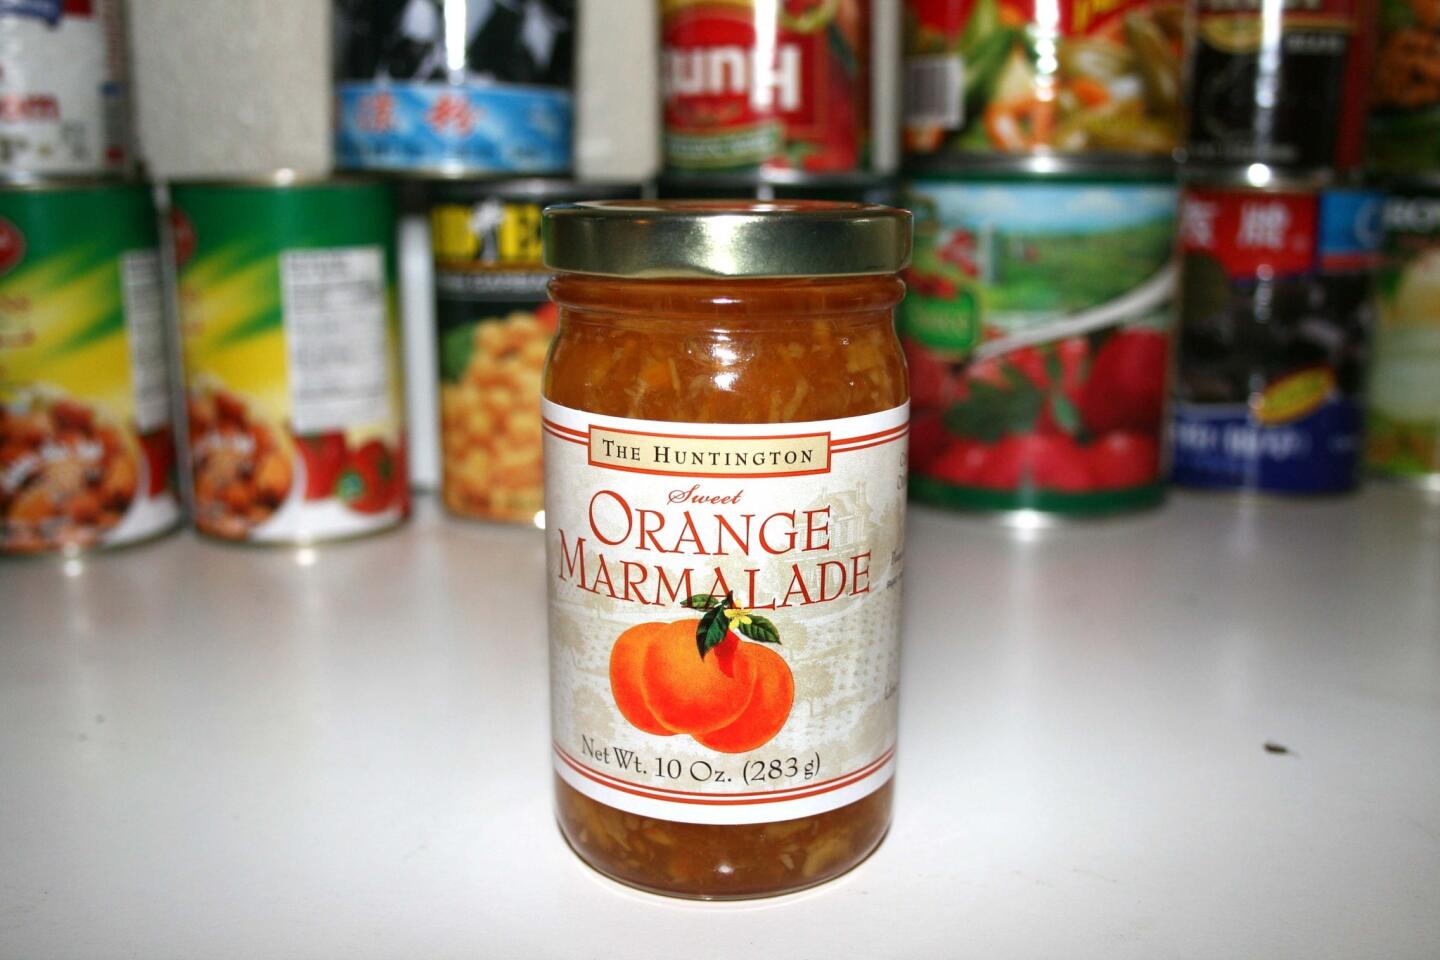 These 10-ounce jars of marmalade are made from fruit from orange groves once owned by railroad magnate Henry E. Huntington, namesake of Huntington Library in San Marino. Price: $7.95 Where to find: Huntington Library gift shop, 1151 Oxford Road, San Marino, http://www.shophuntington.org/husworma.html --JL